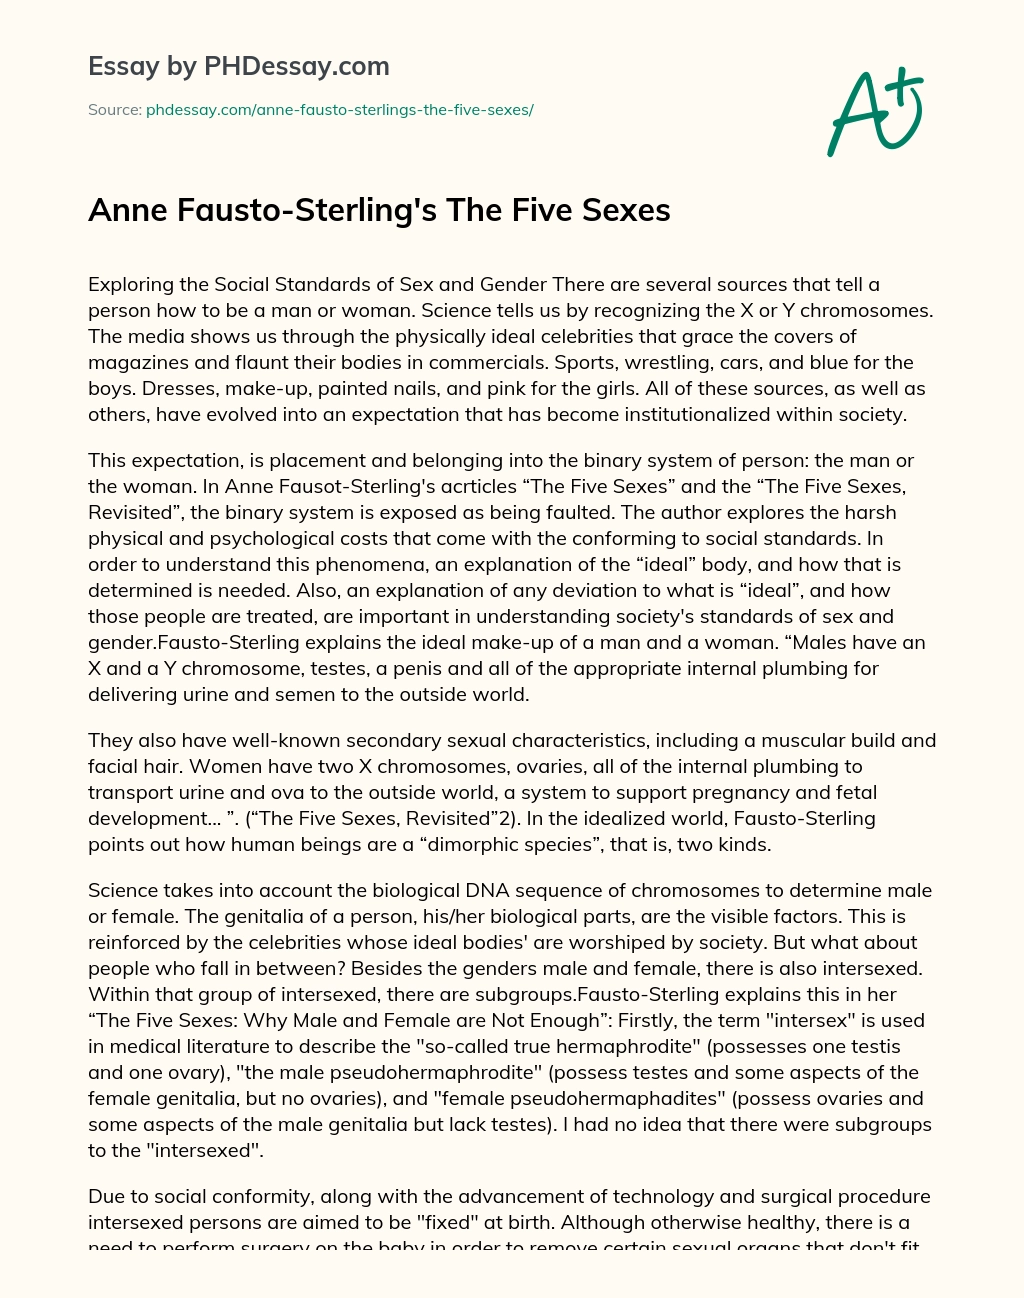 Anne Fausto-Sterling’s The Five Sexes essay